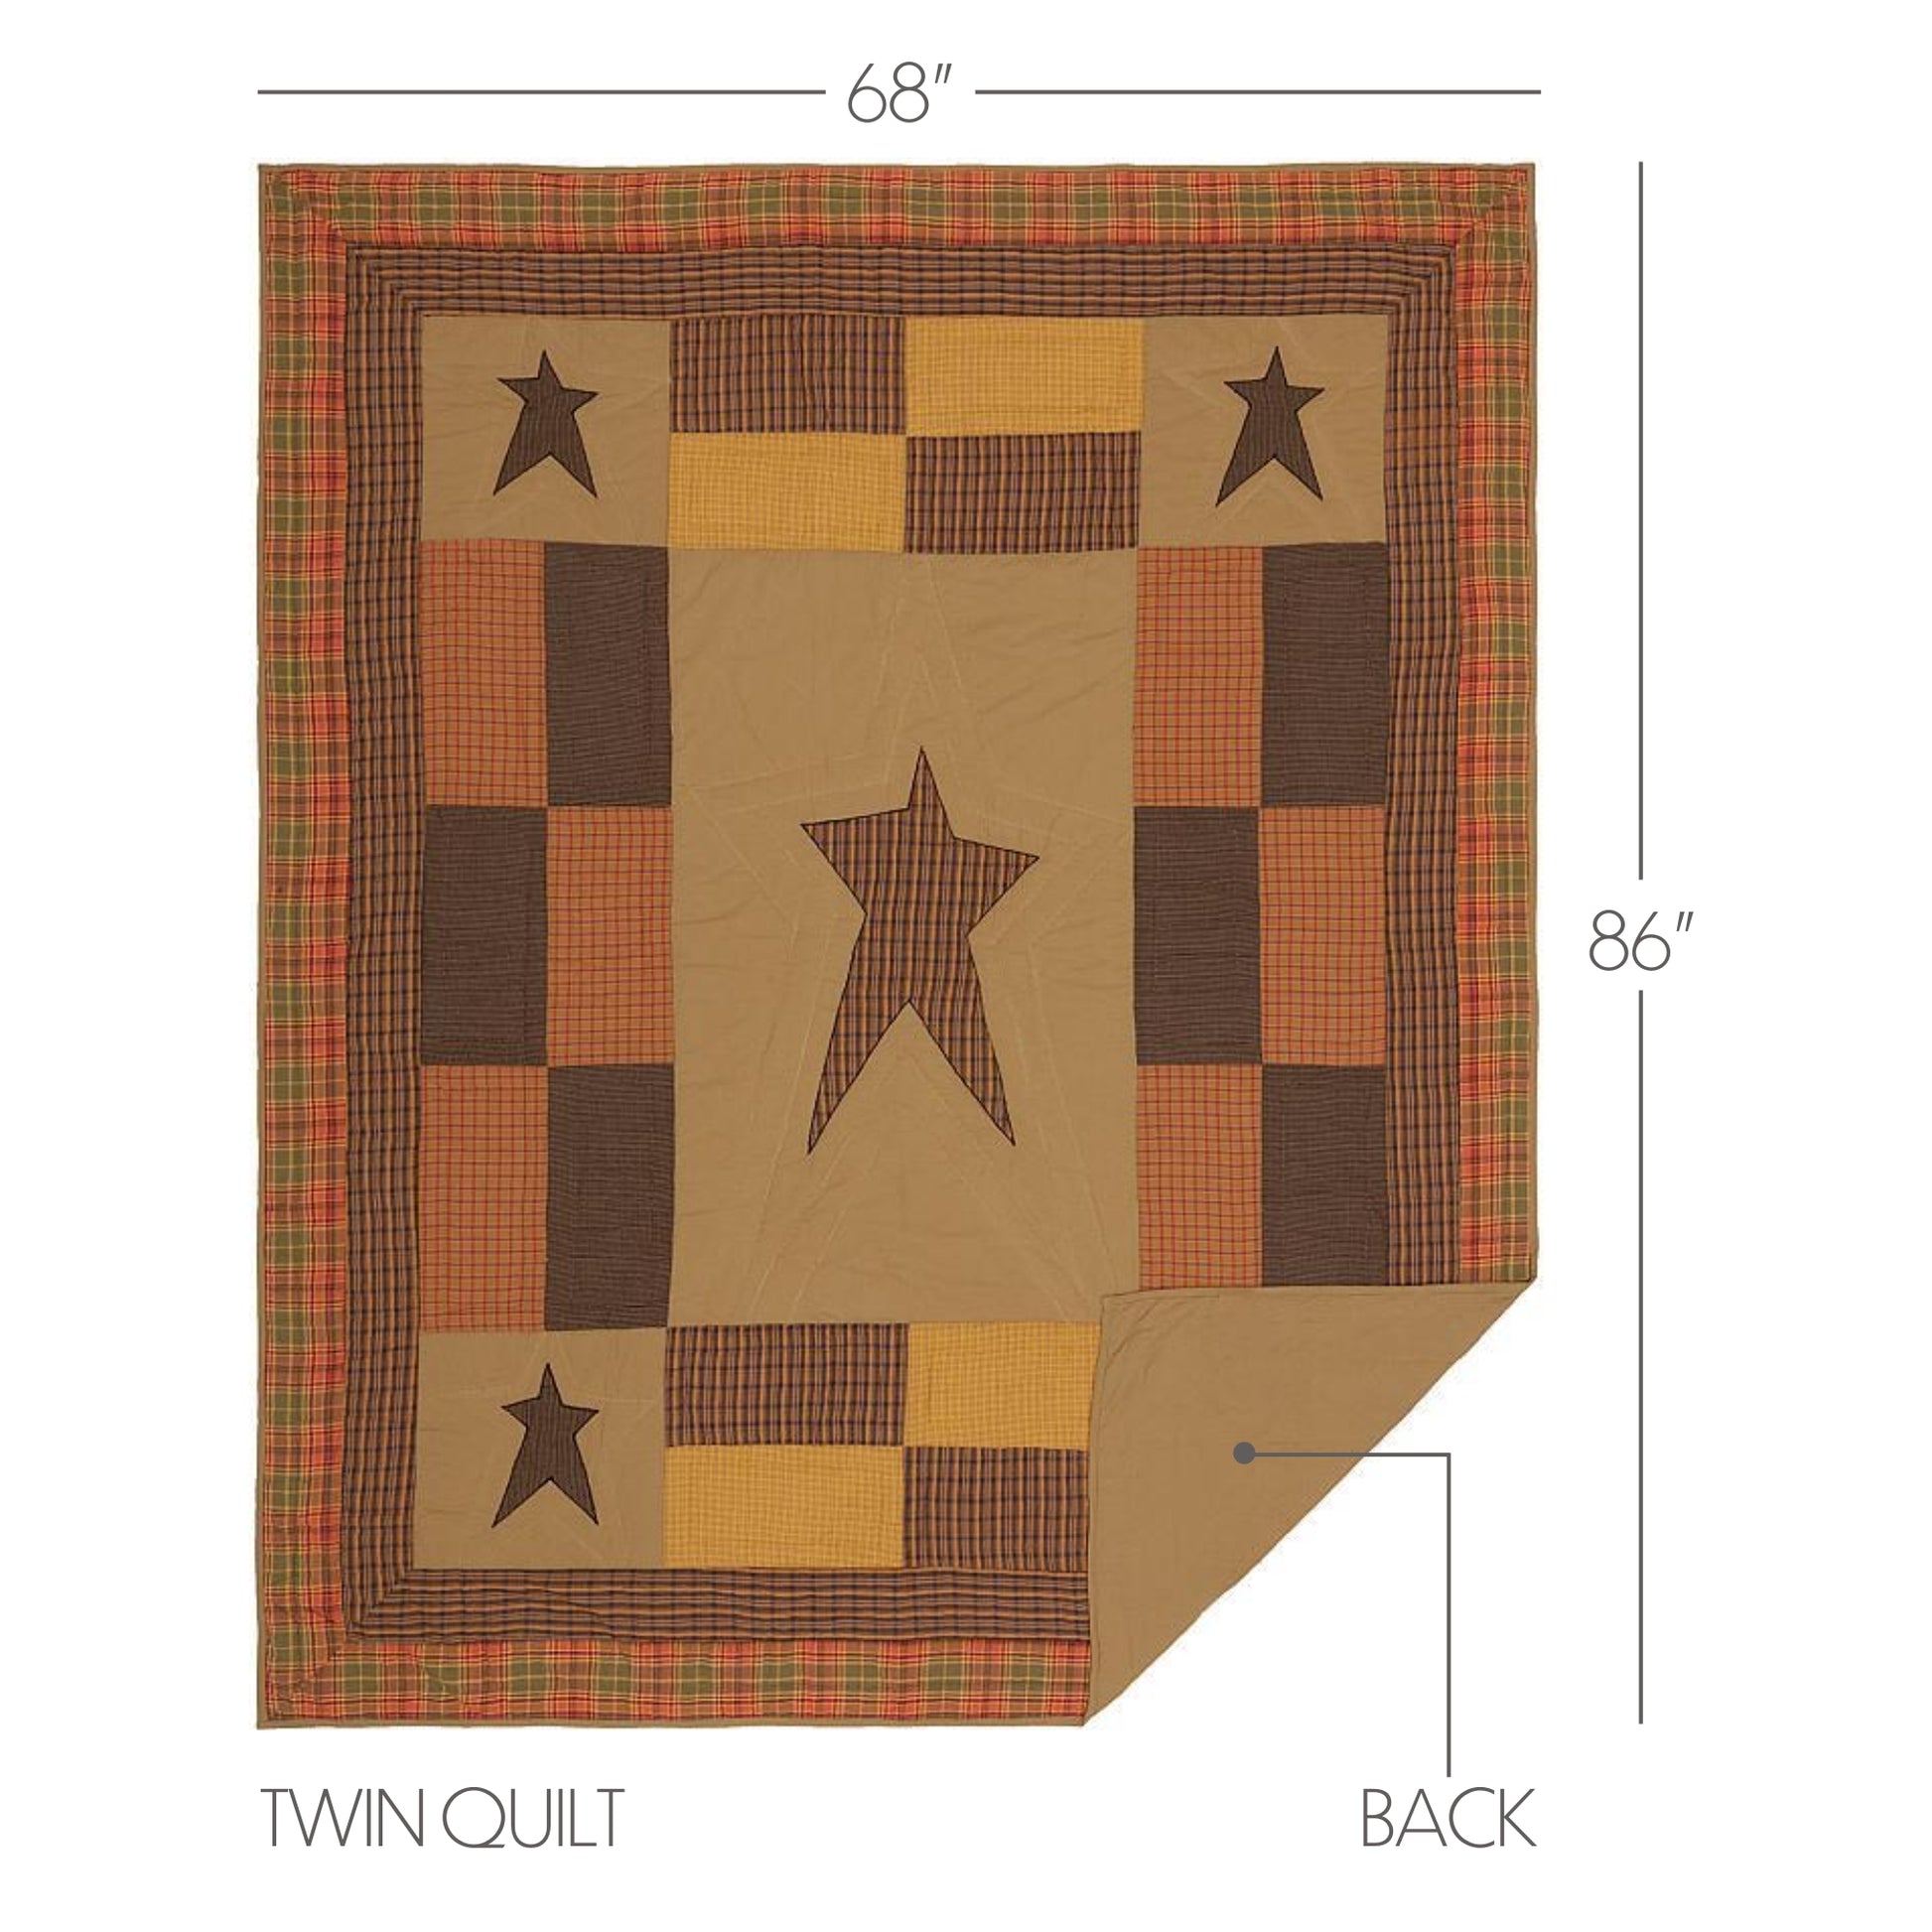 17992-Stratton-Twin-Quilt-68Wx86L-image-1